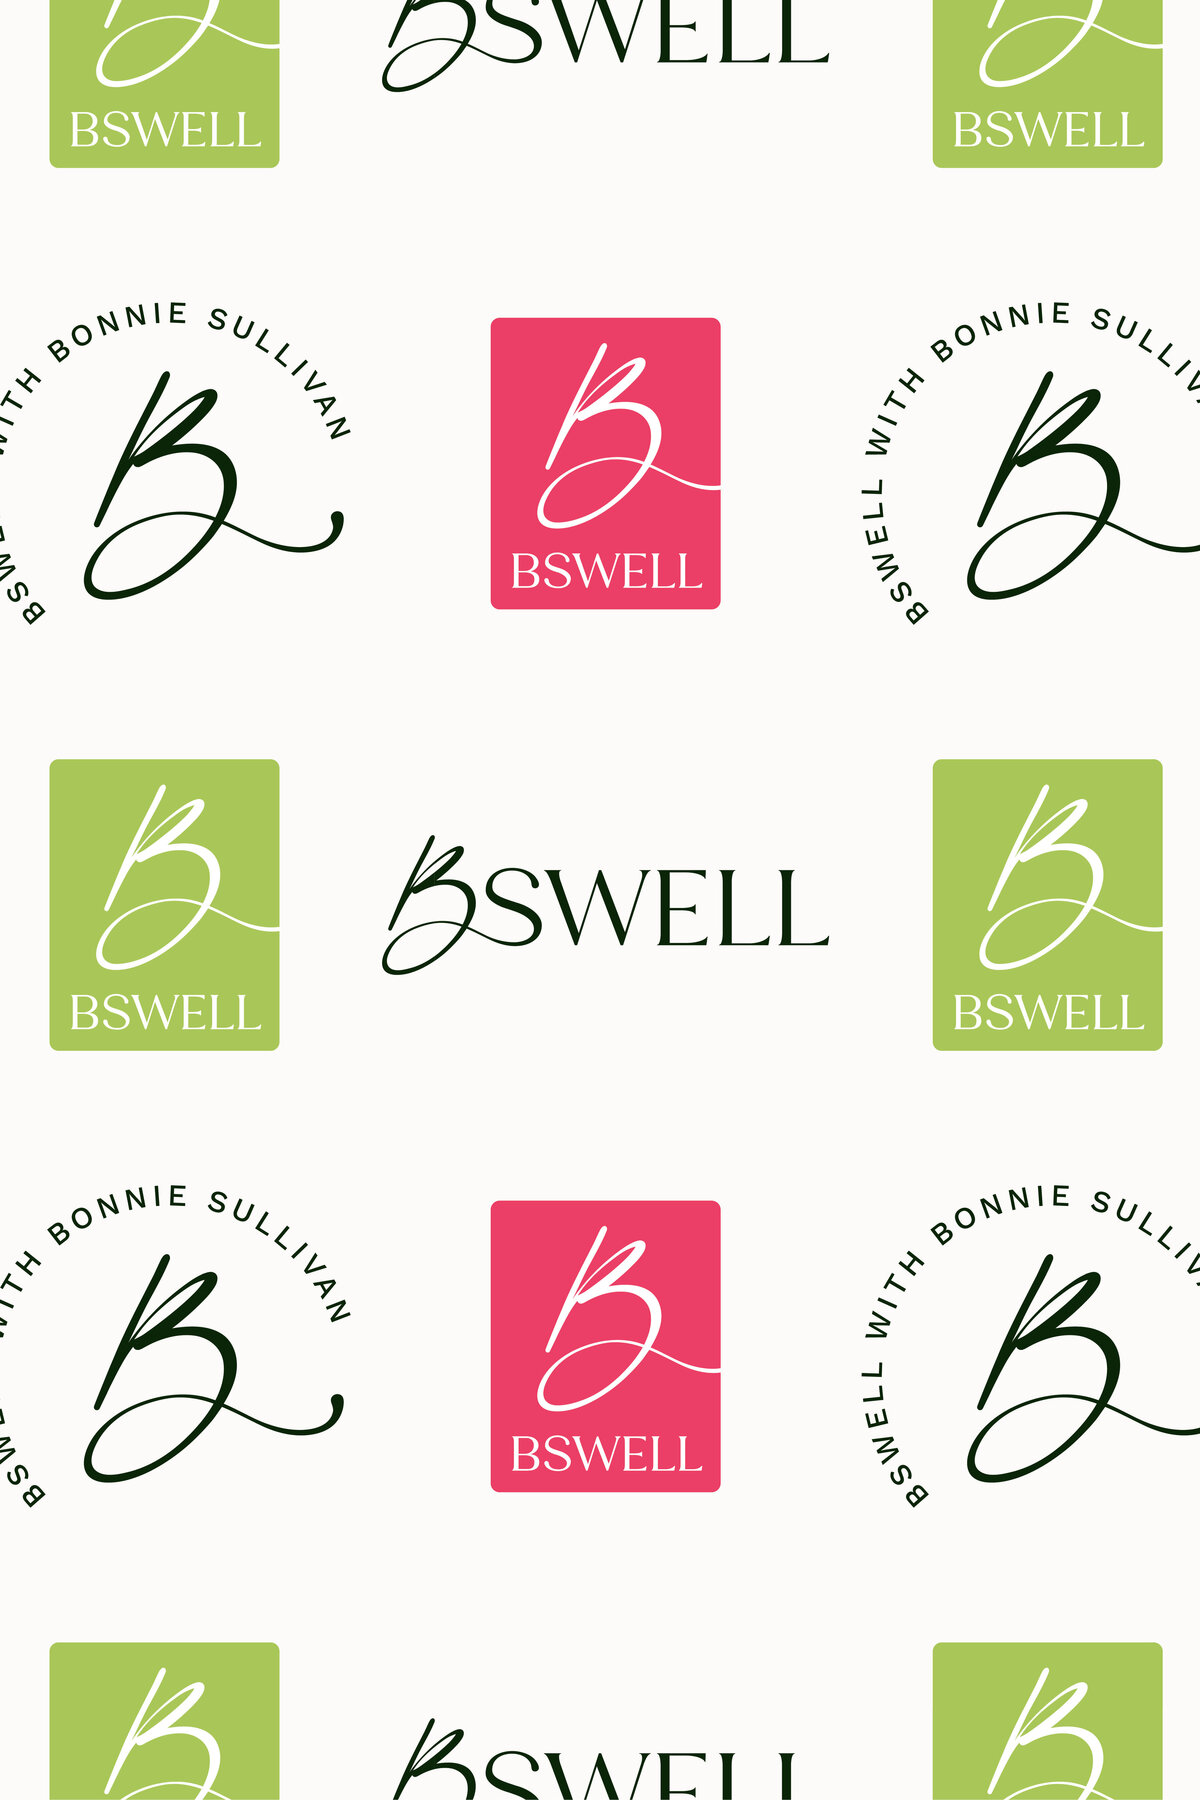 logo patterns for BSwell